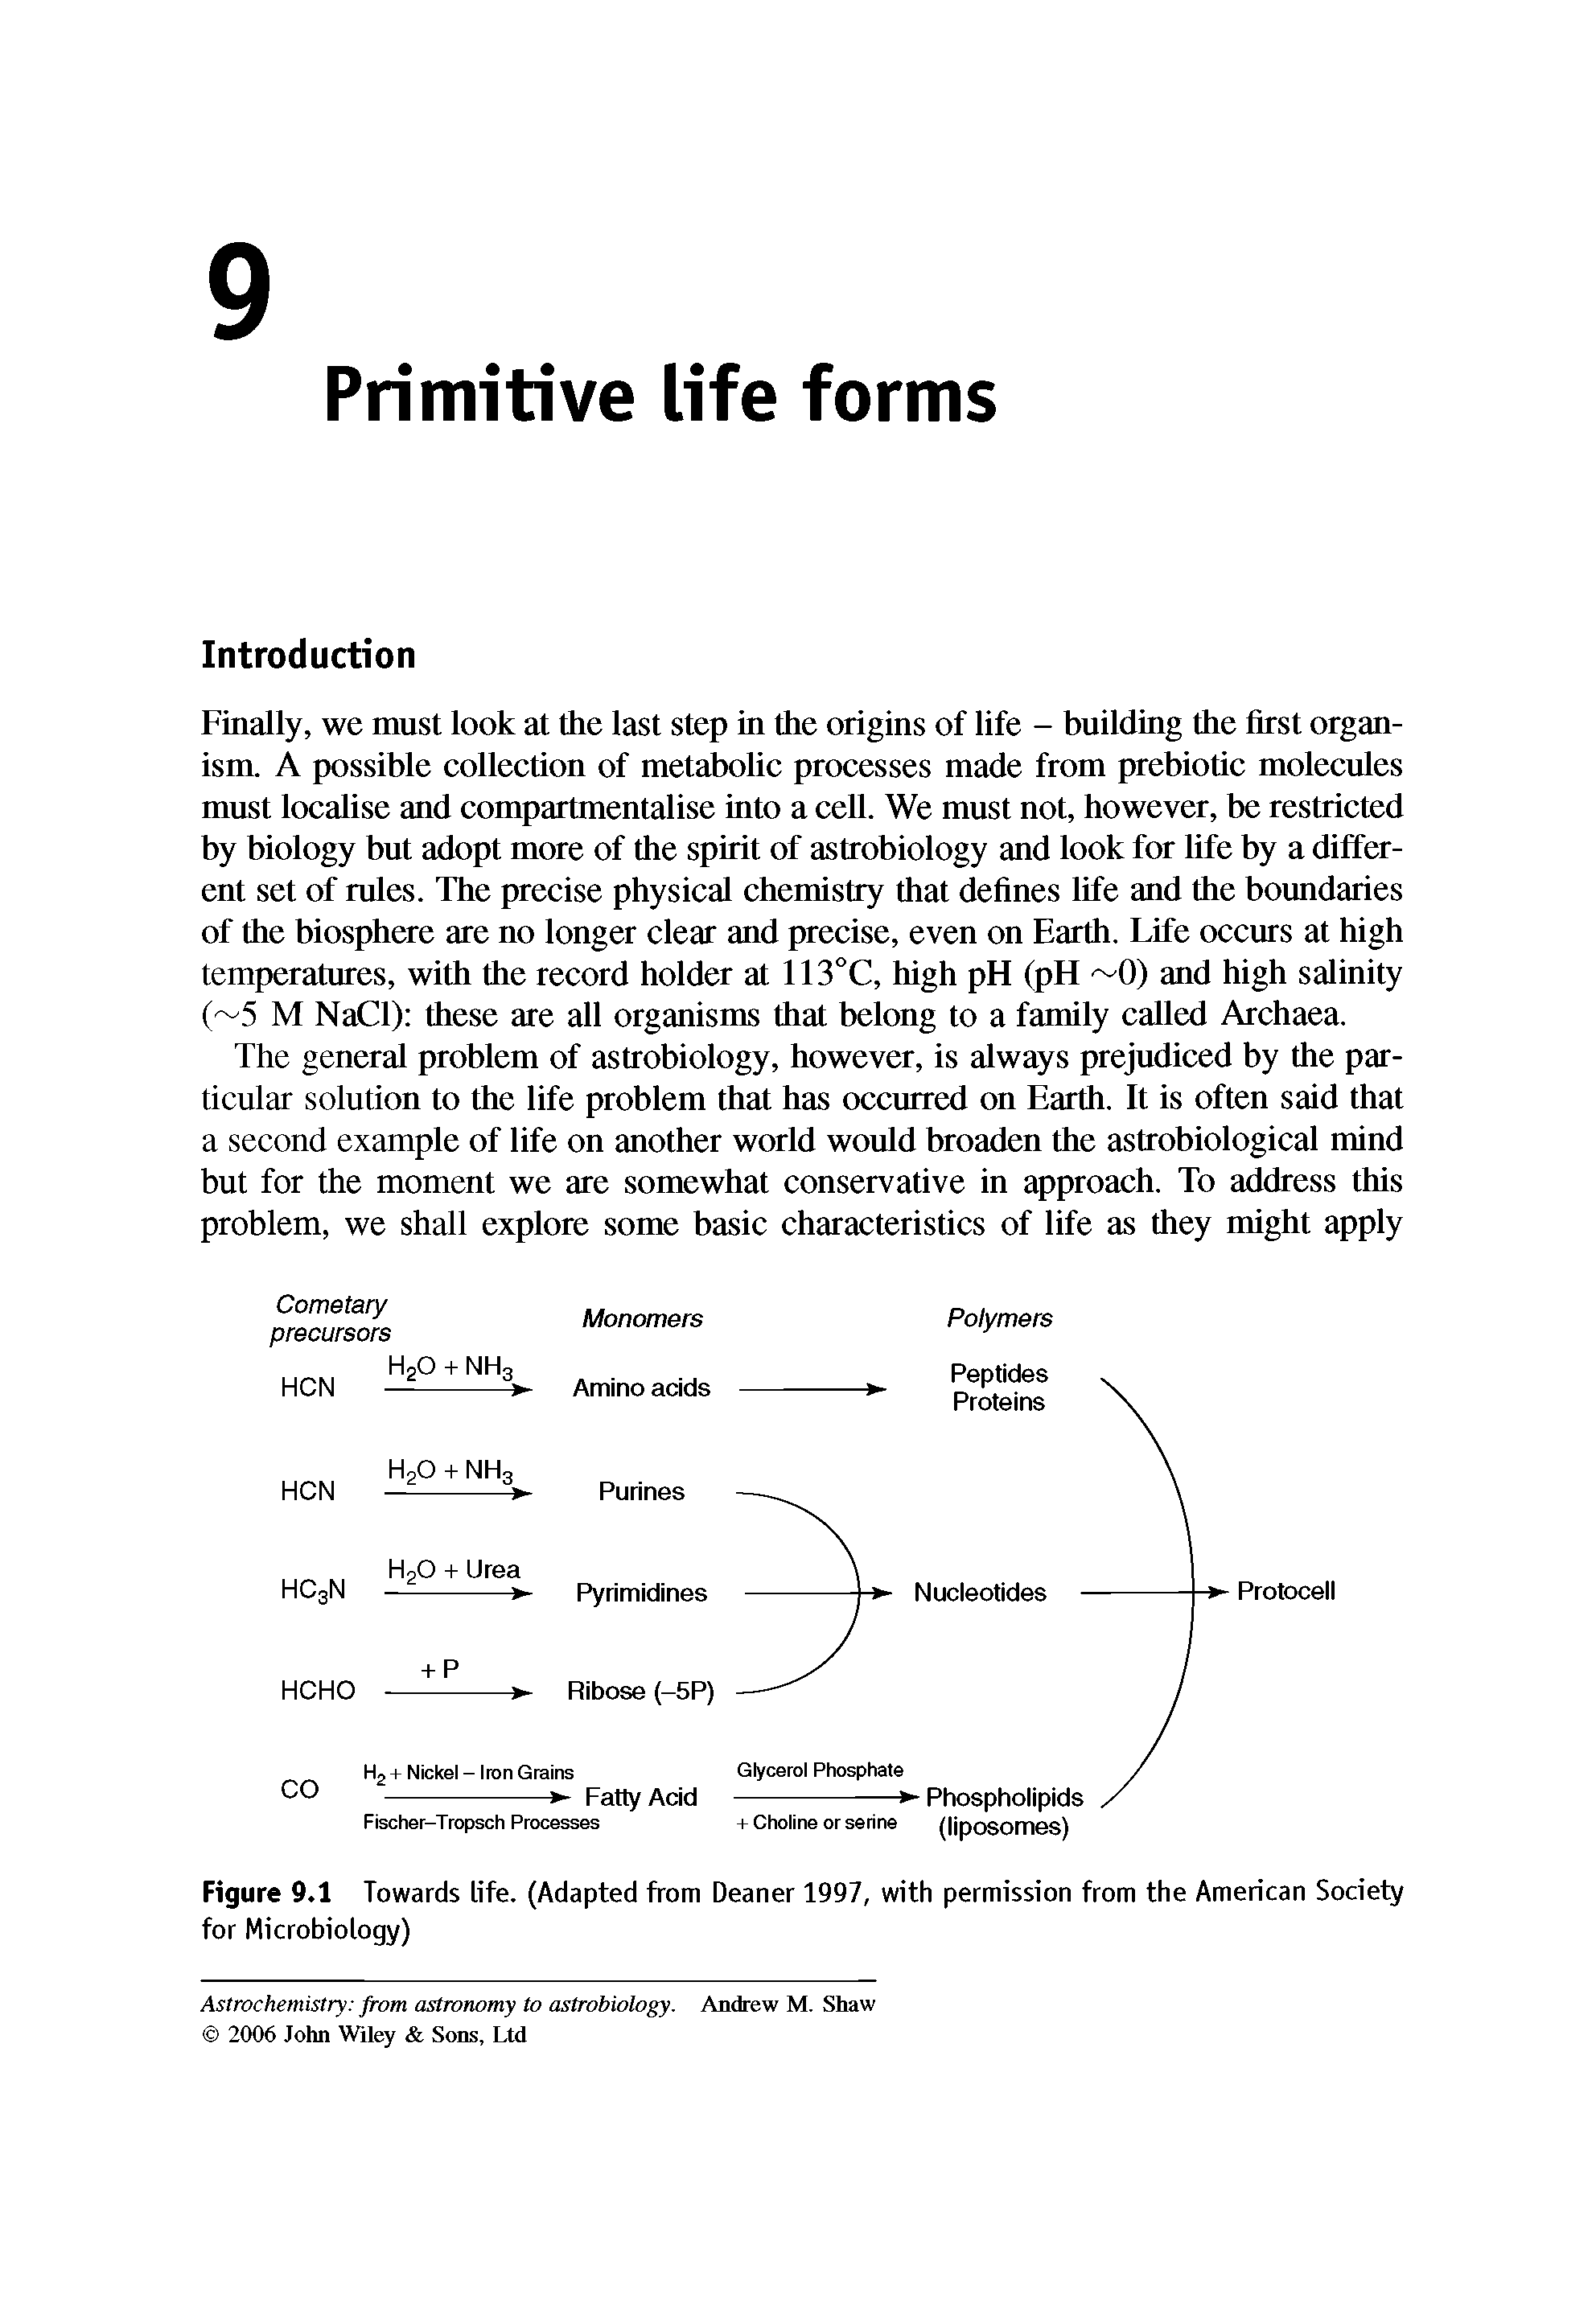 Figure 9.1 Towards life. (Adapted from Deaner 1997, with permission from the American Society for Microbiology)...